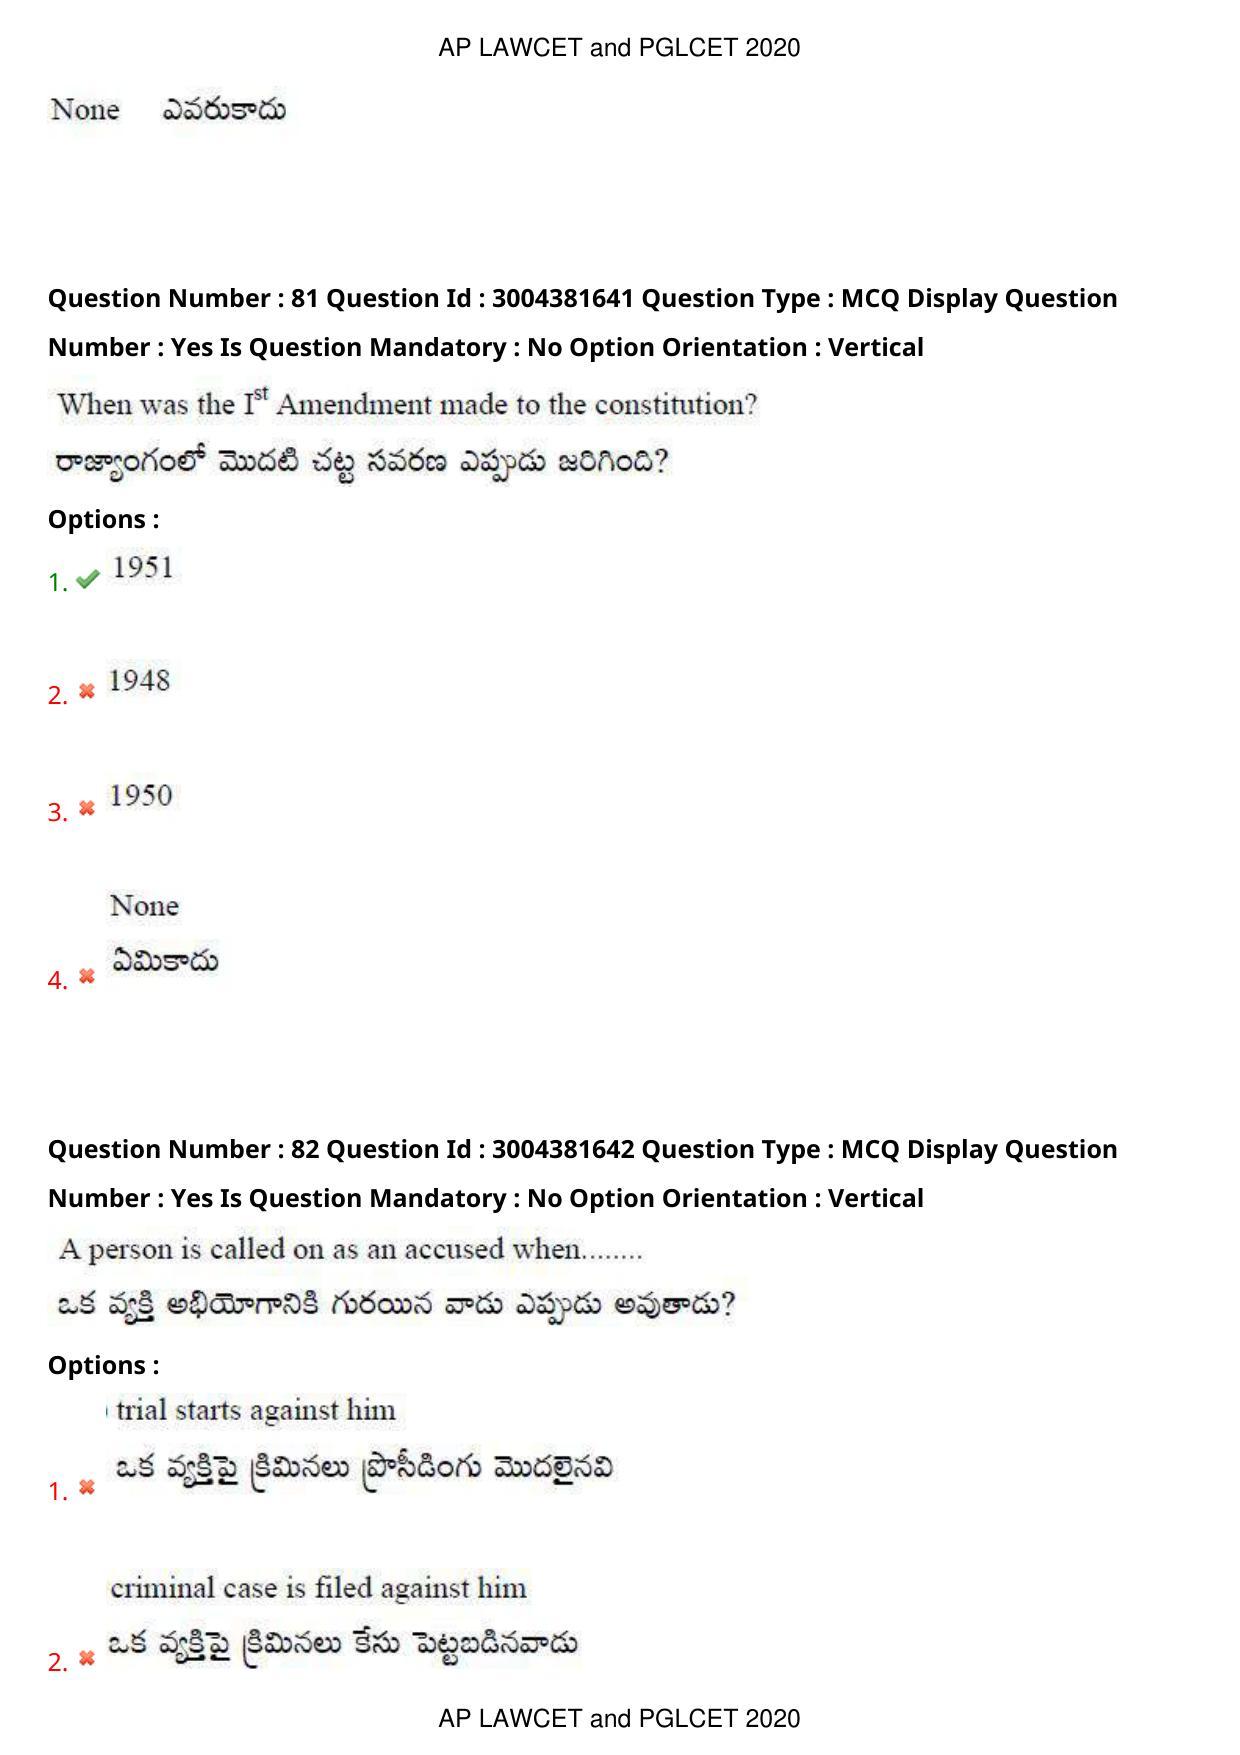 AP LAWCET 2020 - 5 Year LLB Question Paper With Keys - Page 53